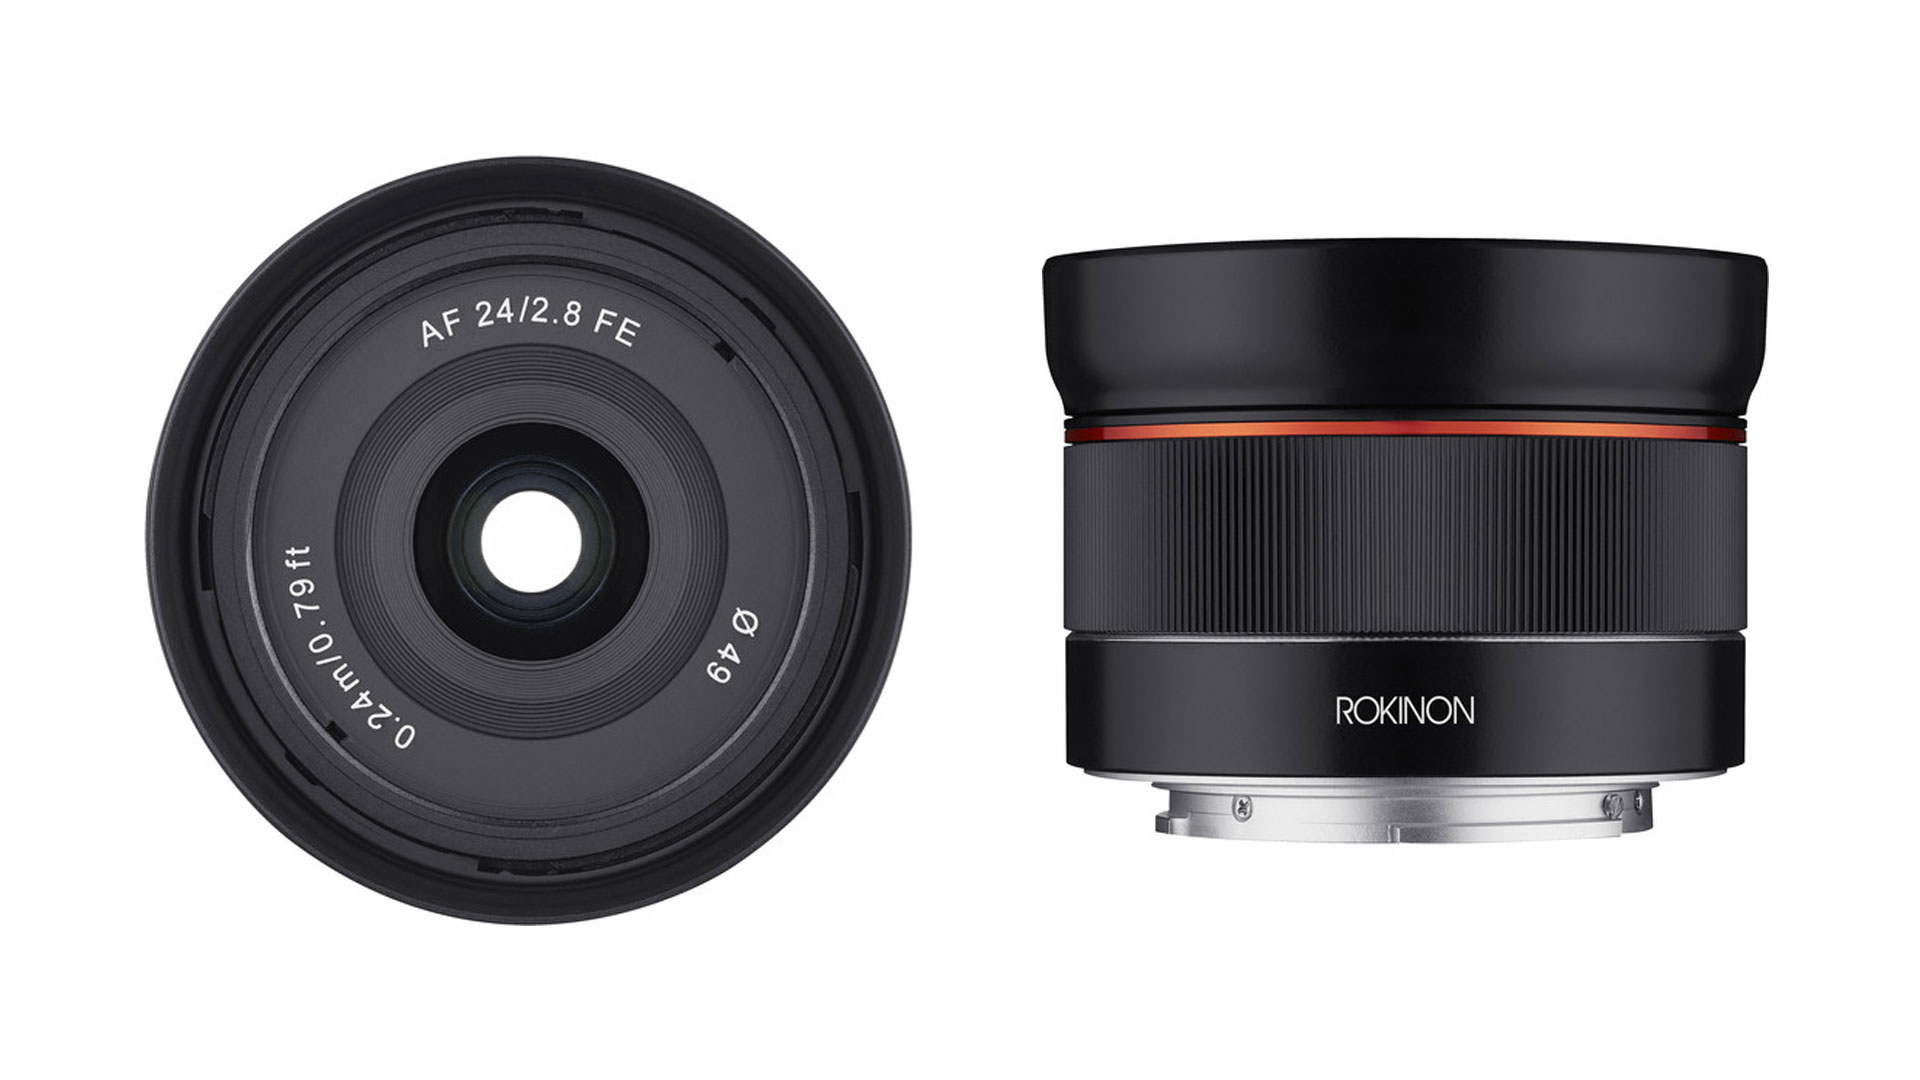 Samyang AF 24mm F/2.8 FE Announced - A New Tiny Wide Angle Lens